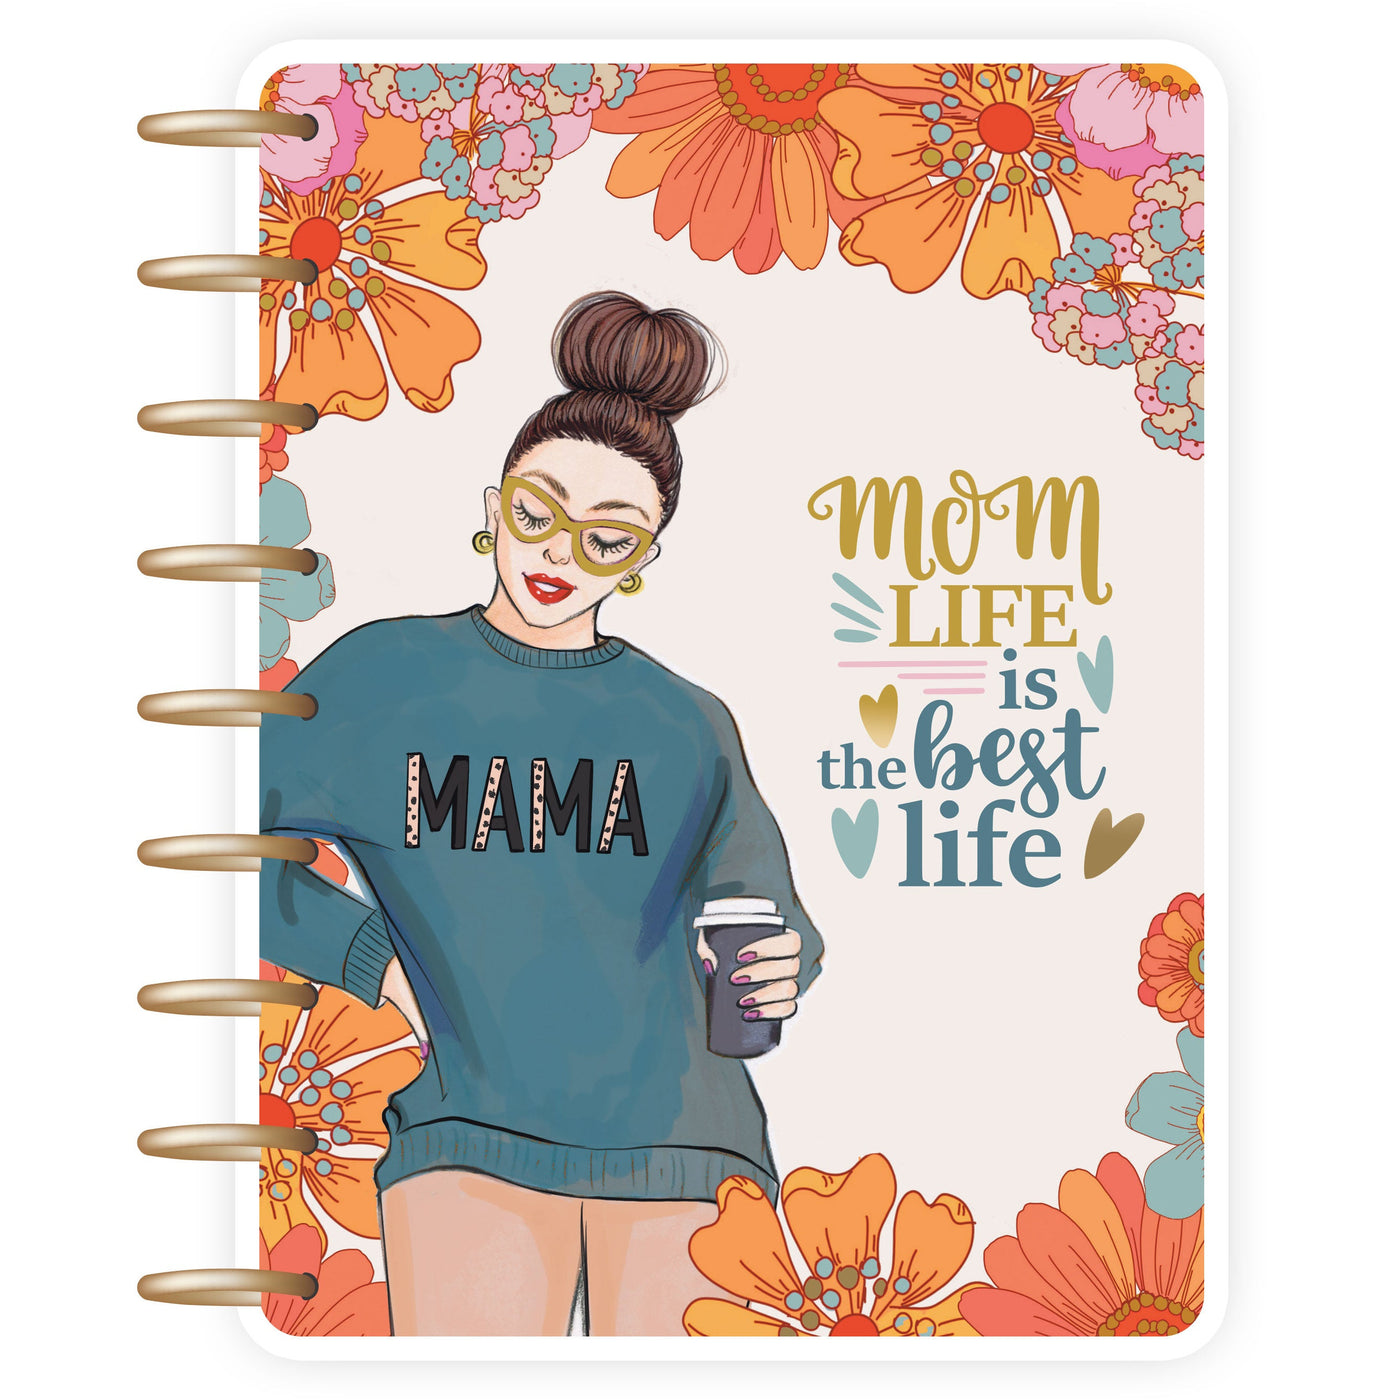 Mom Life Planner Cover - Rongrong DeVoe - Shop Rongrong